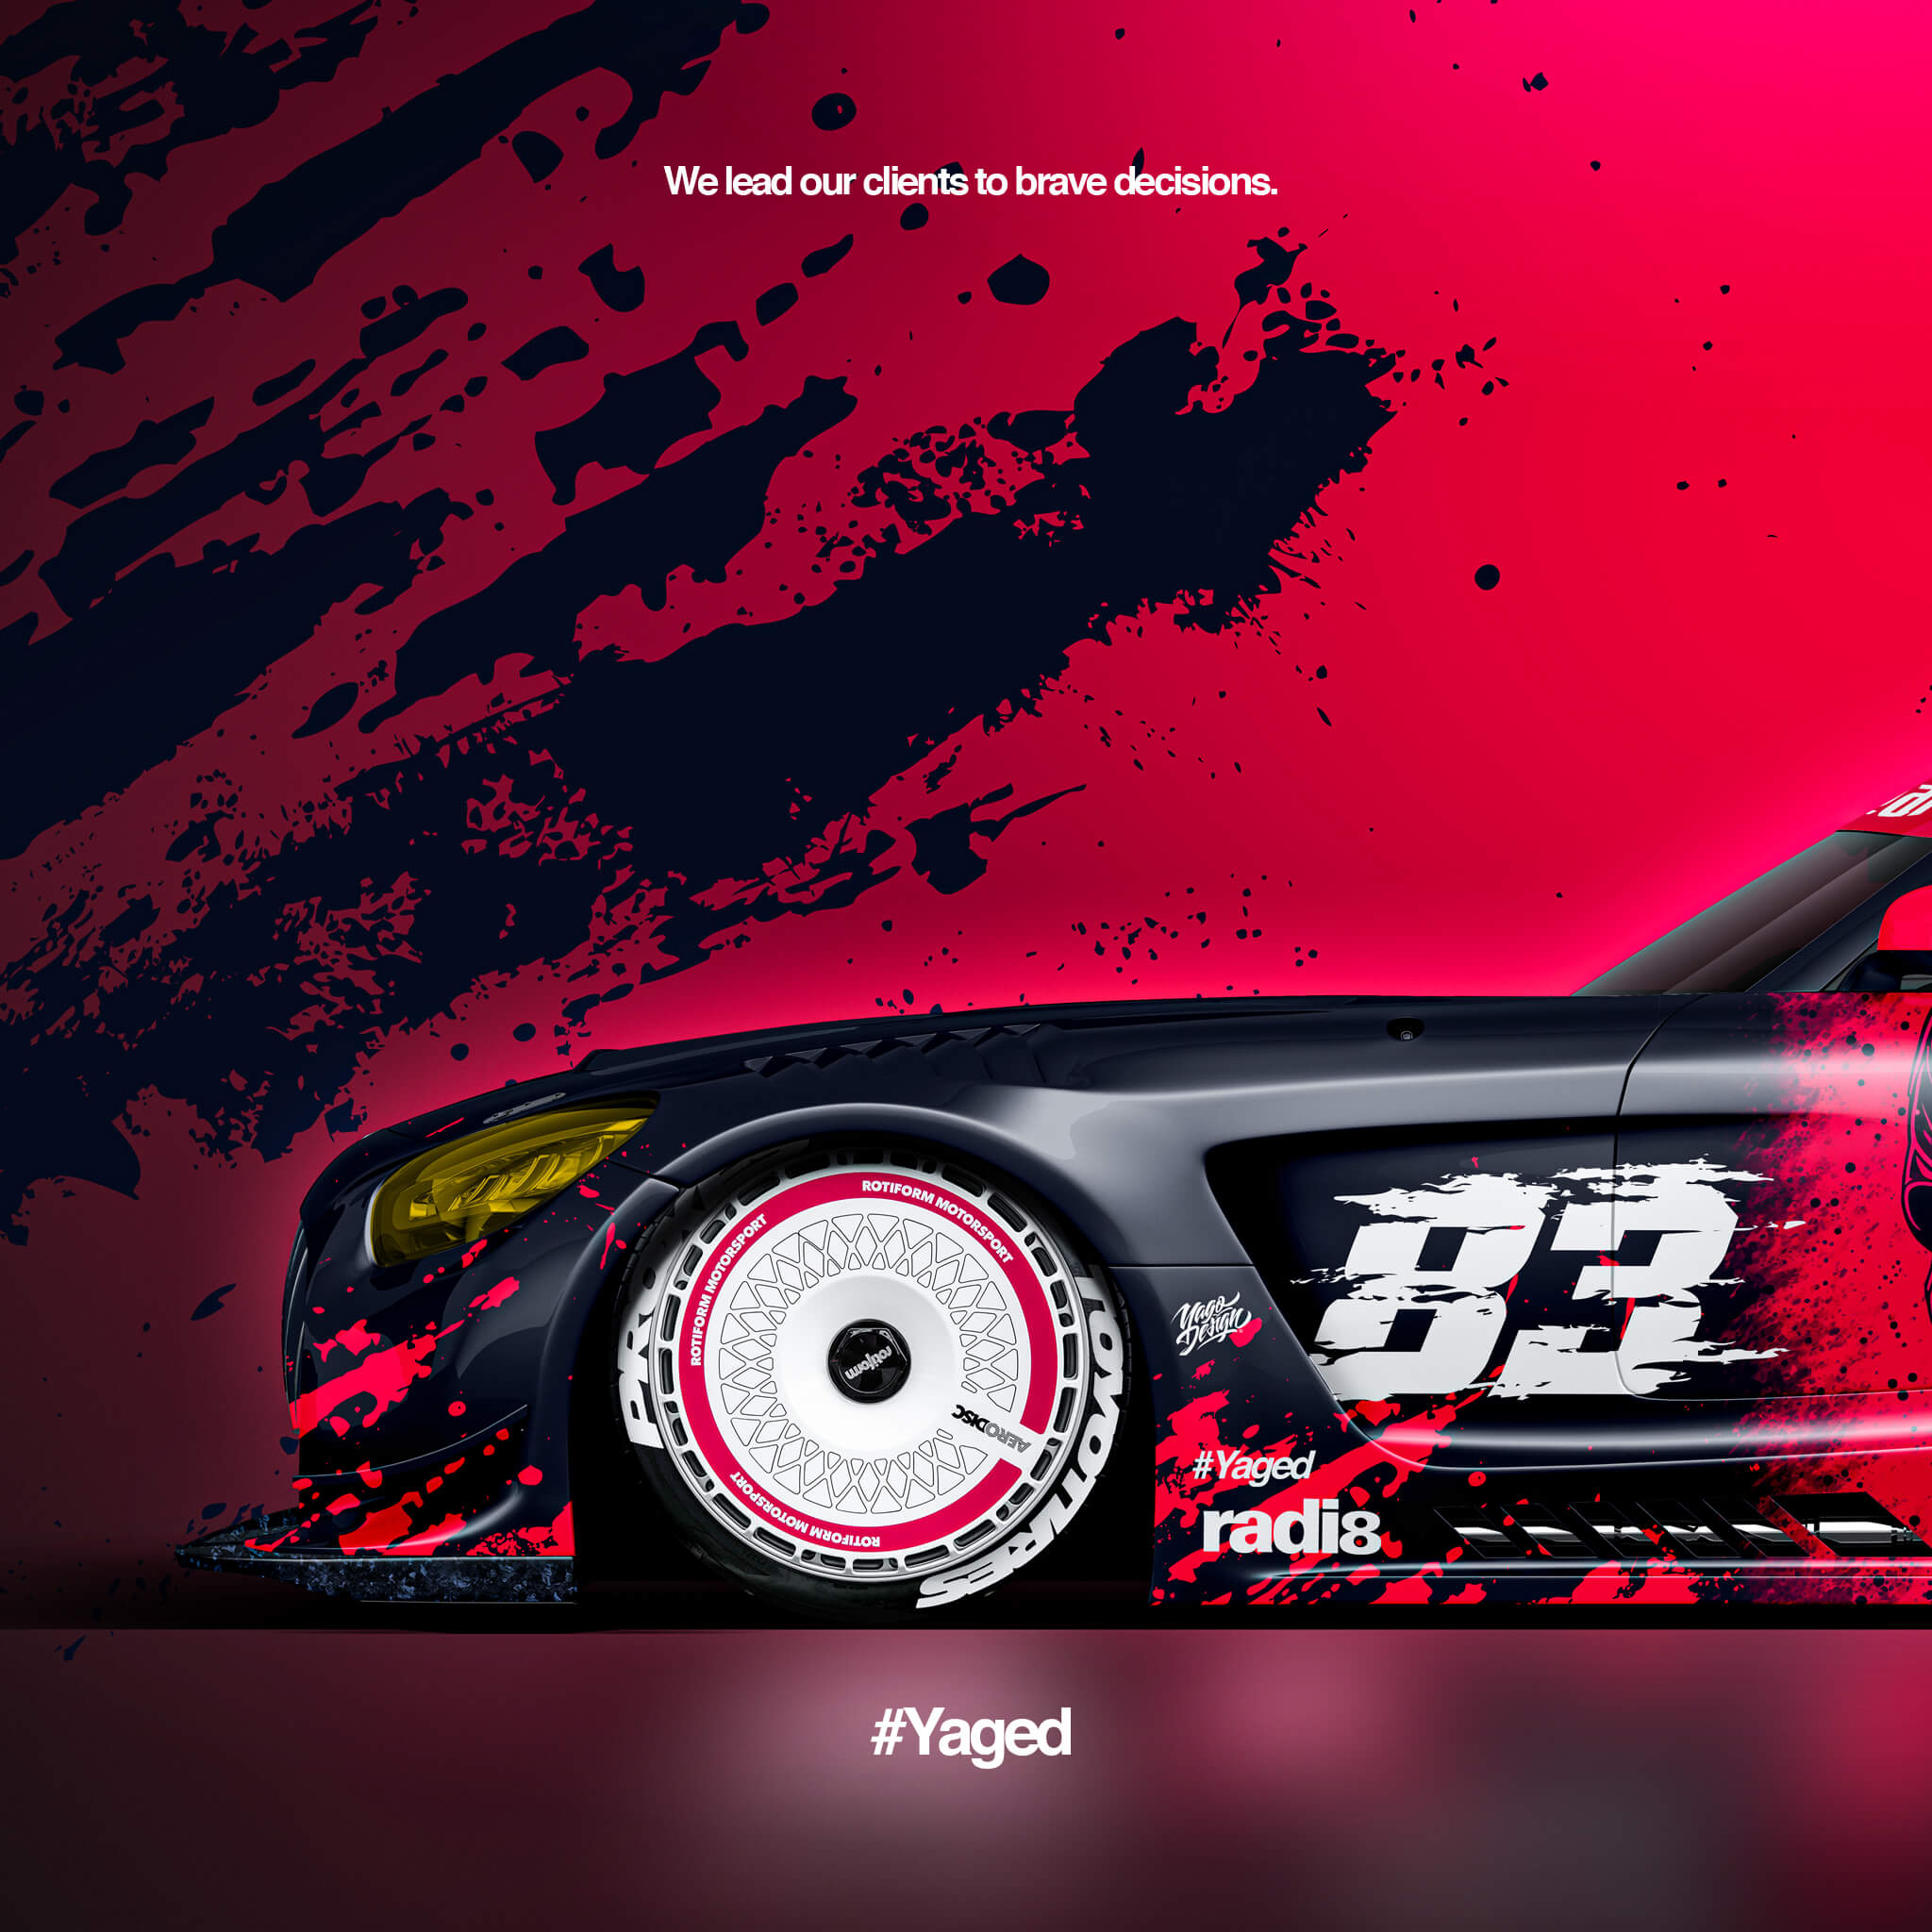 MERCEDES AMG GT FLASH SIDE 2 BY YAGODESIGN 2048 PX